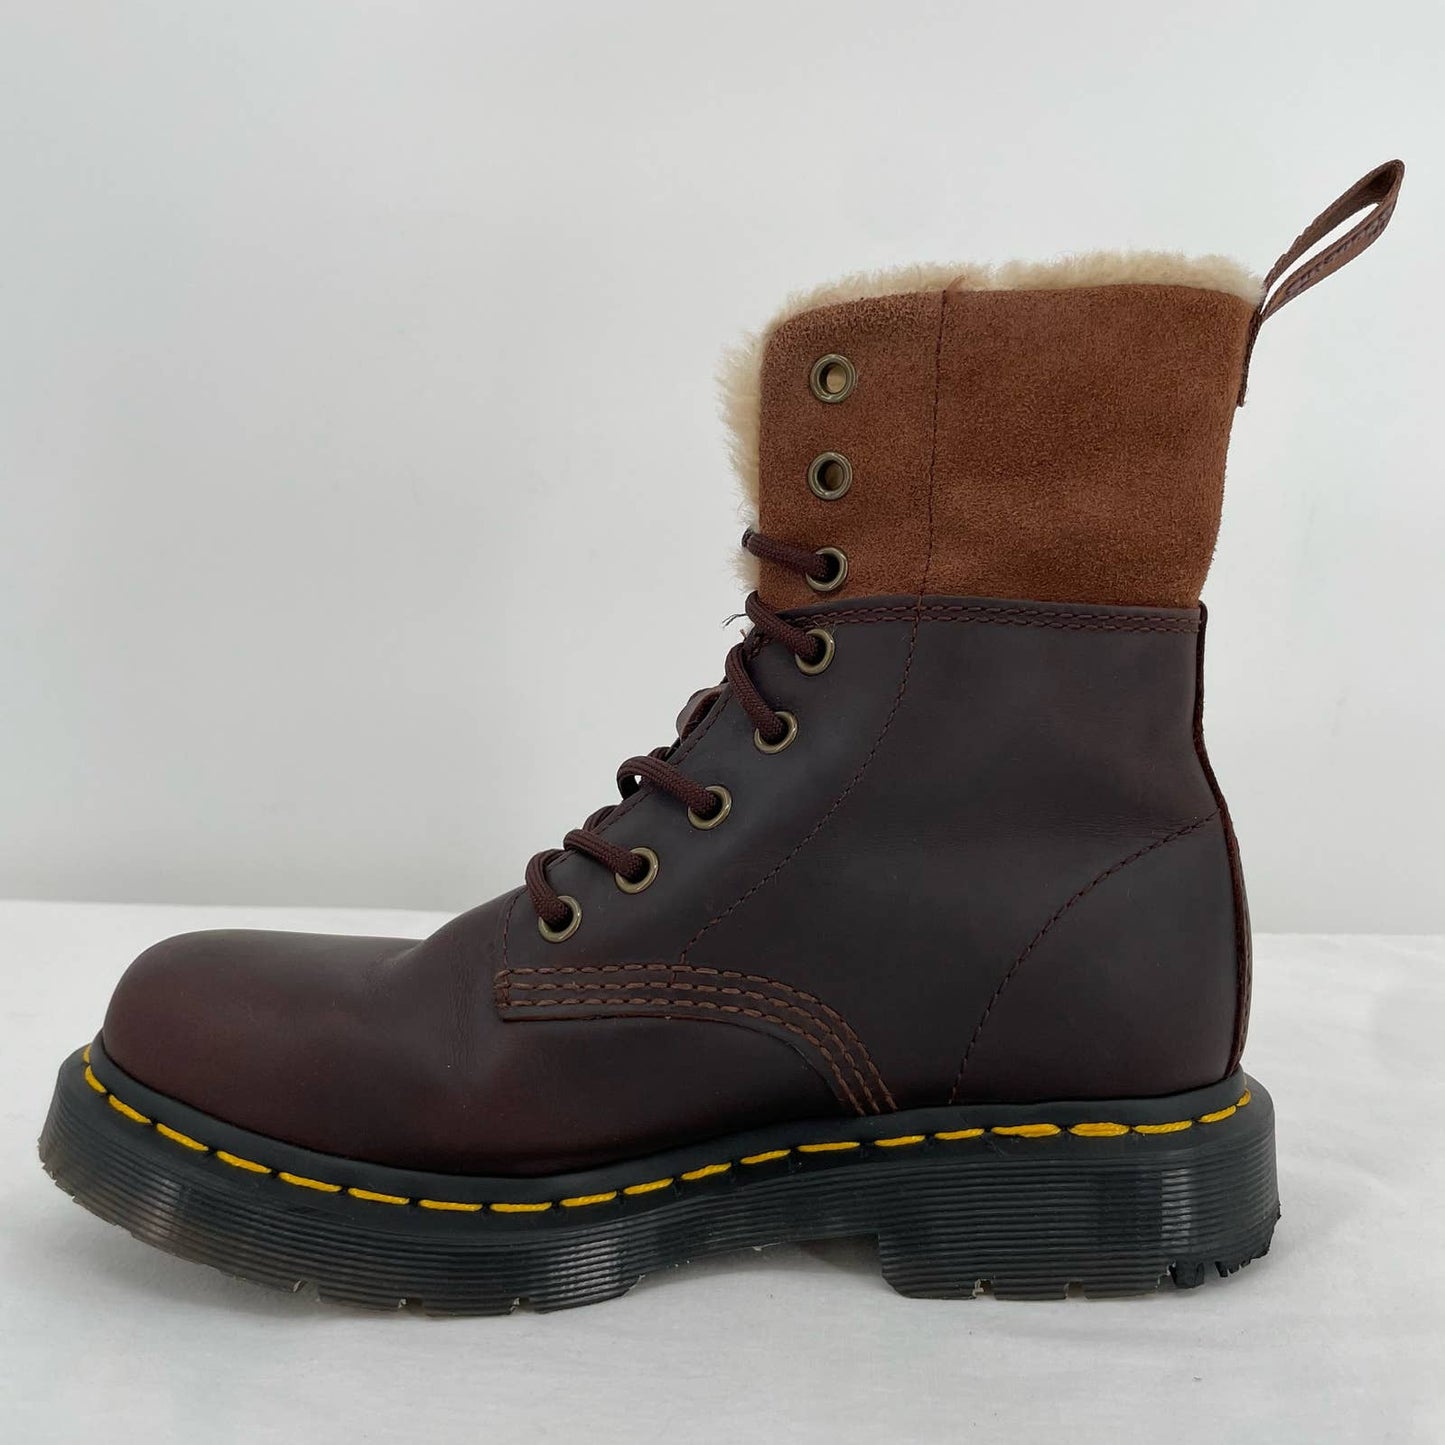 Dr. Marten’s 1460 Kolbert Boots Brown Oiled Leather Faux Fur Lined Winter Style Size 6